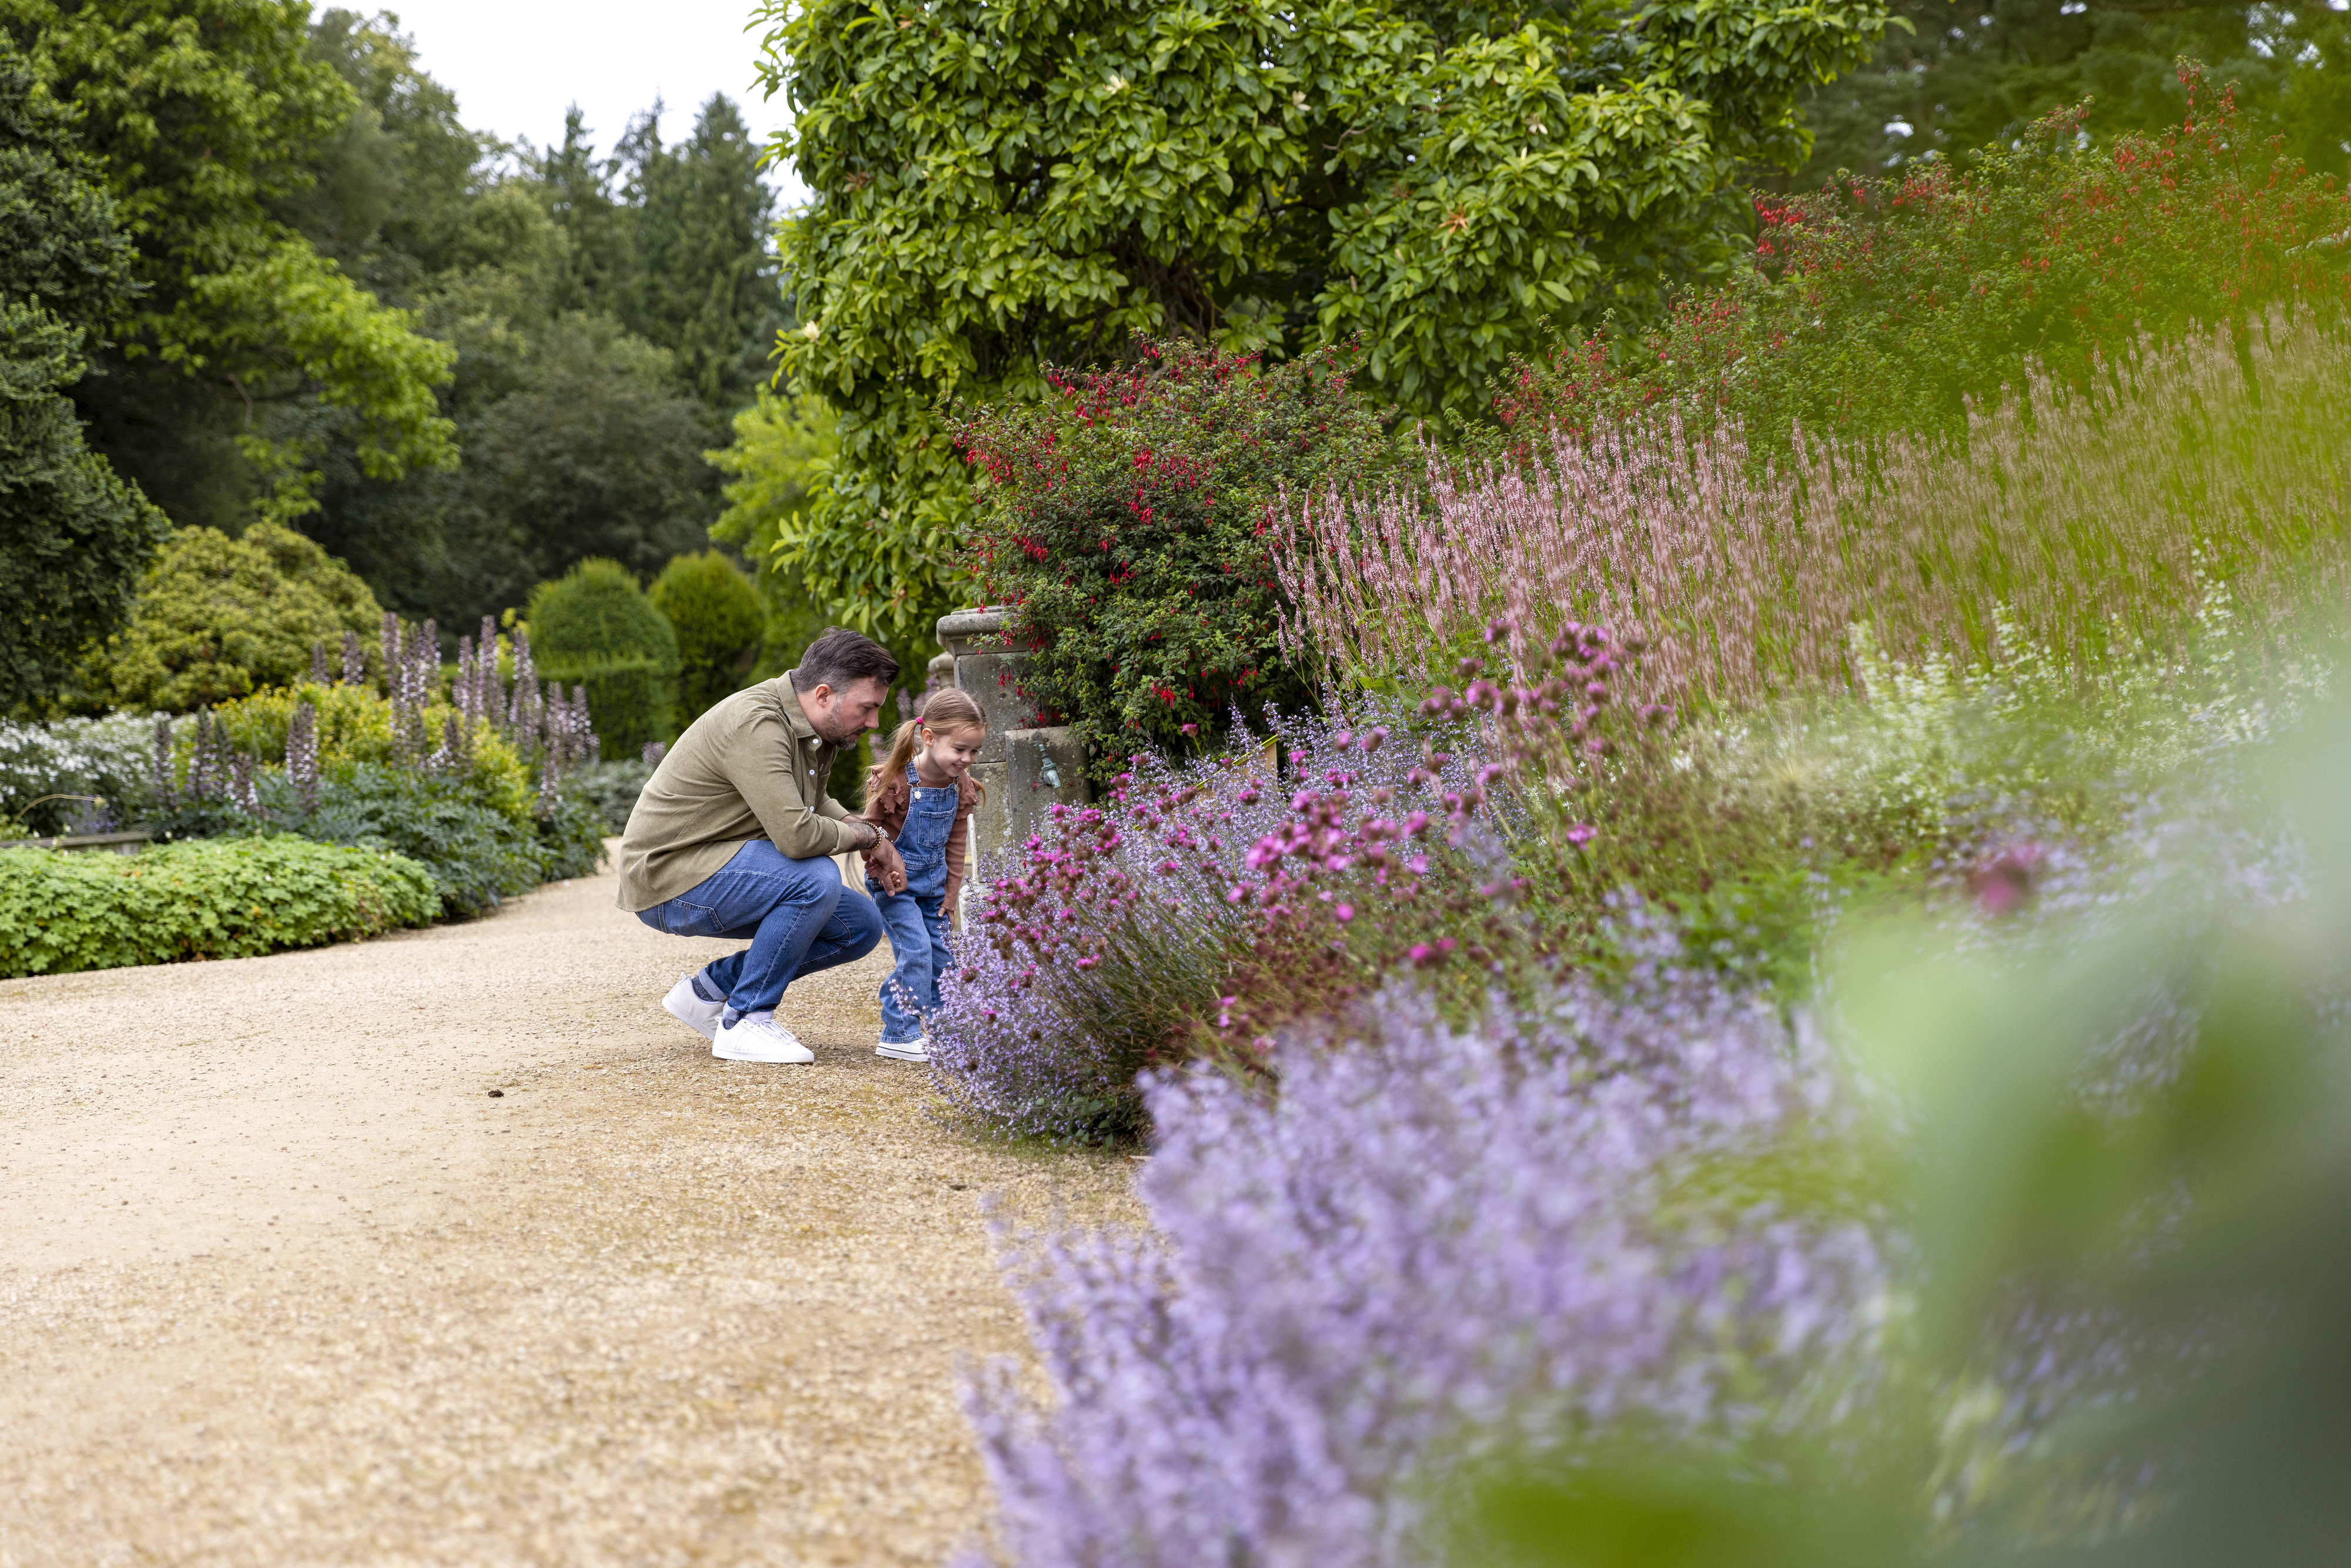 Adult and child looking at foliage at Belsay Hall gardens